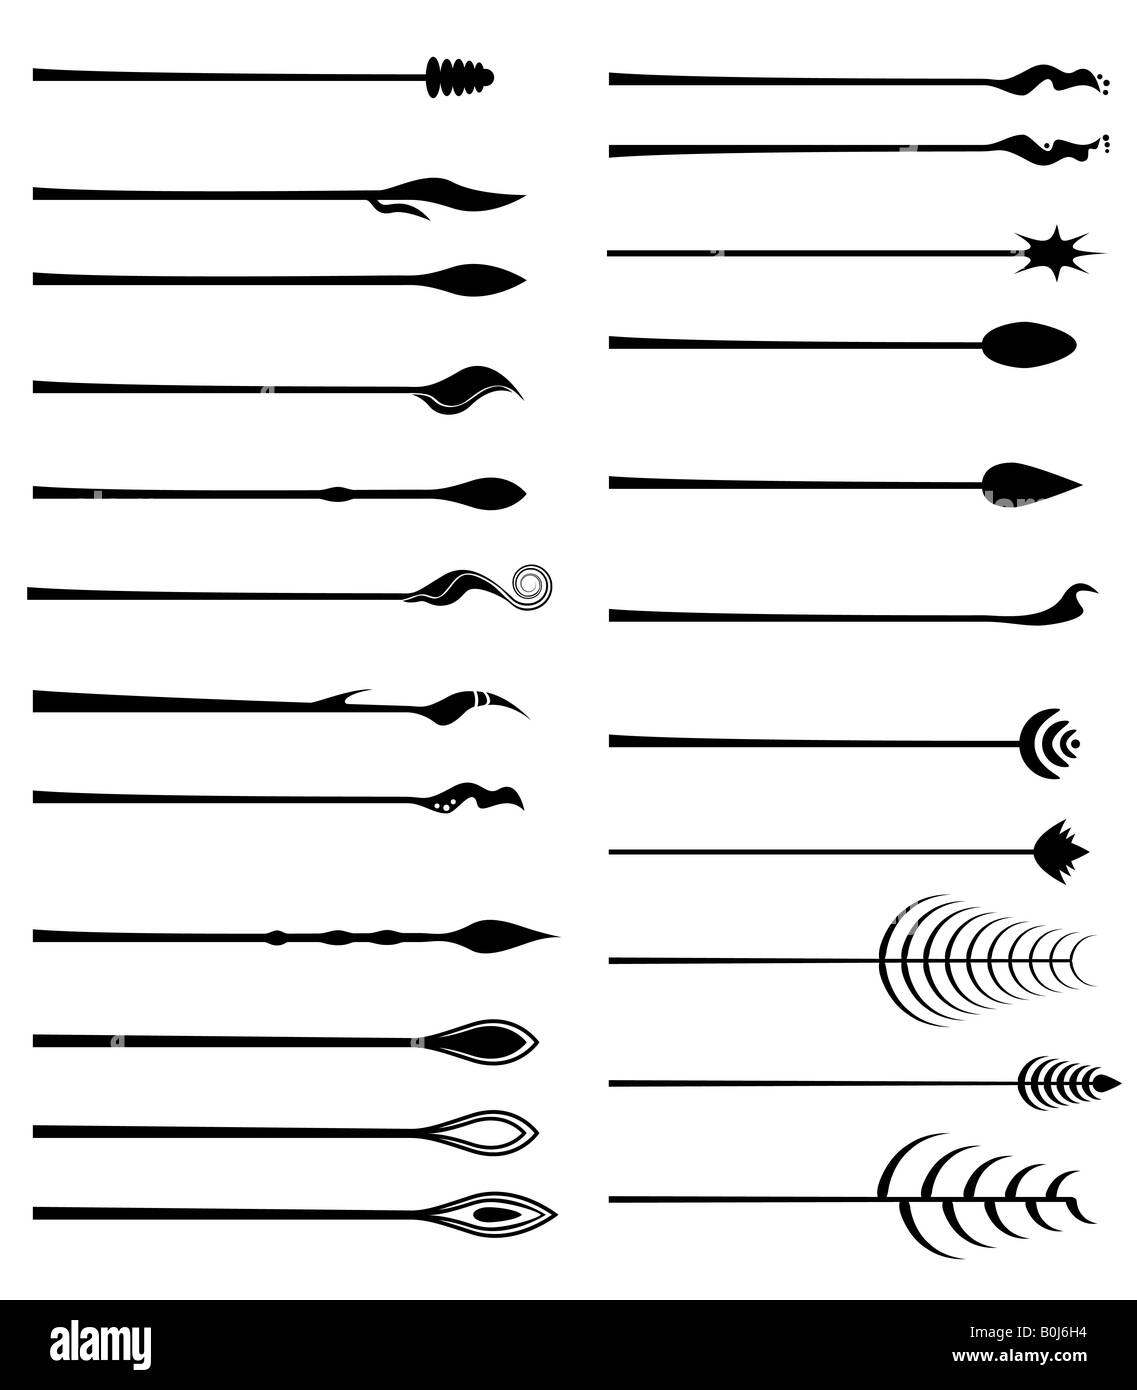 Vector illustration of 23 different floral design element paint brushes or strokes Stock Photo